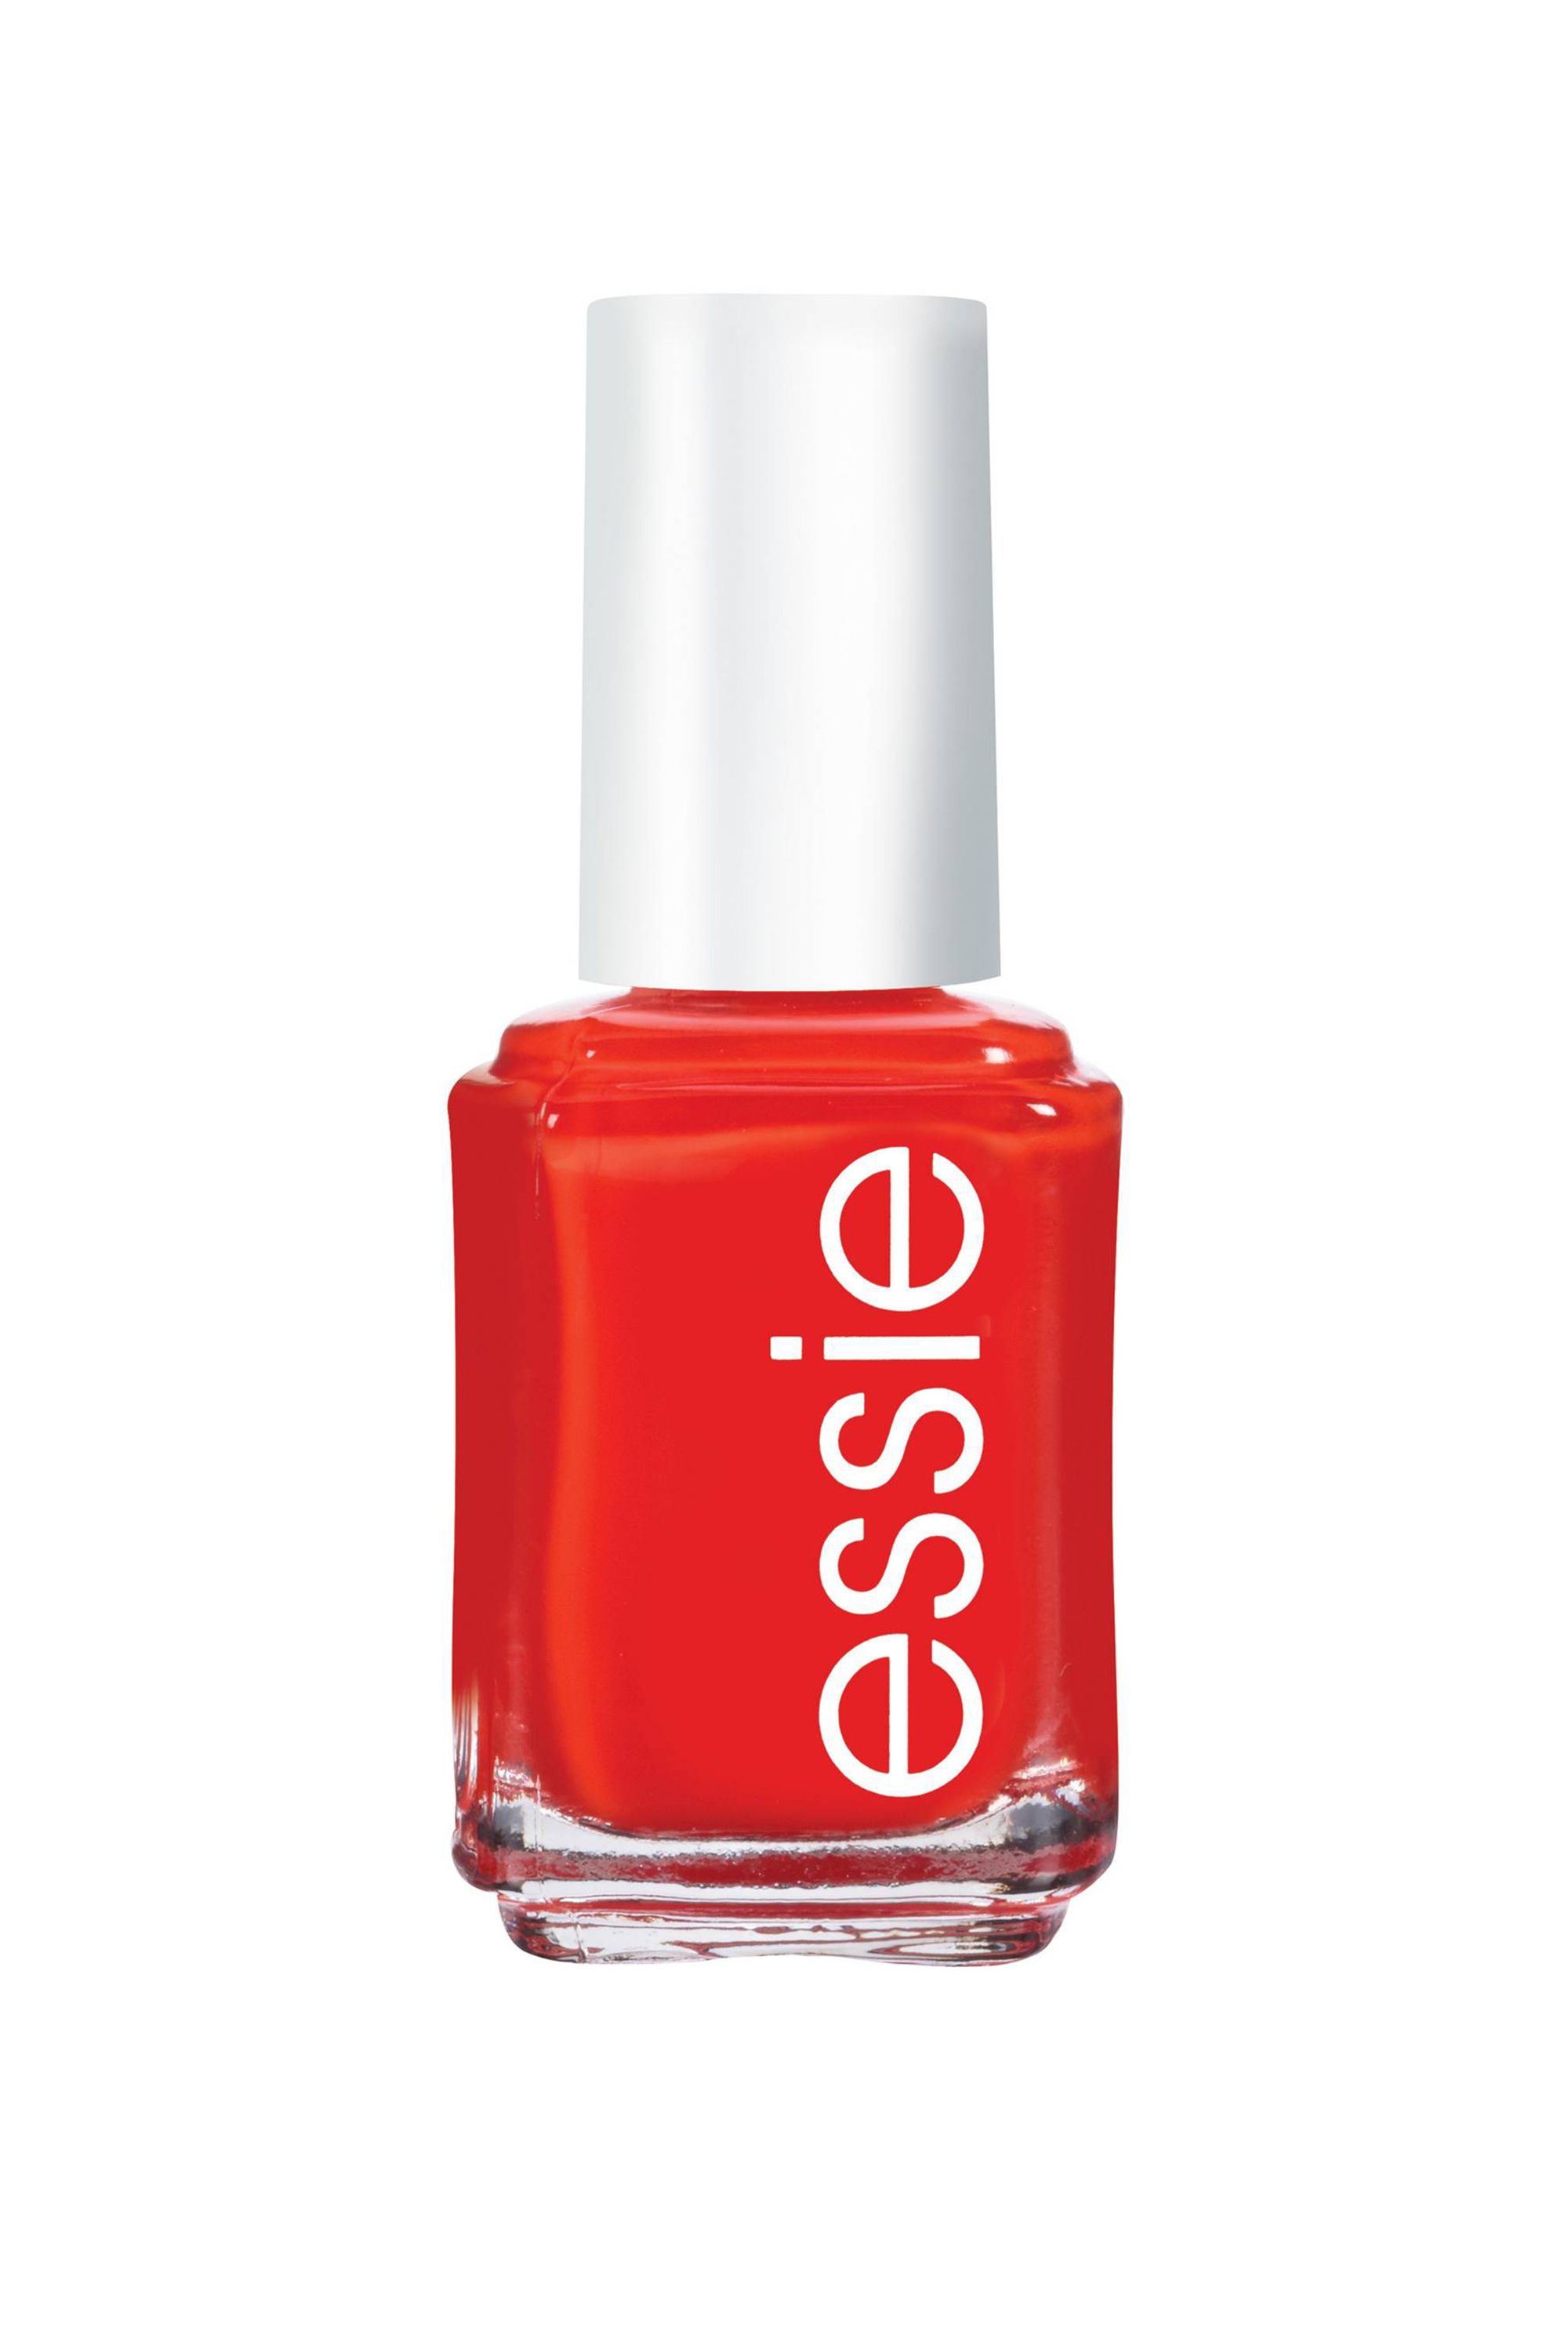 Best Red Polish Colors - Classic Red Manicure Colors